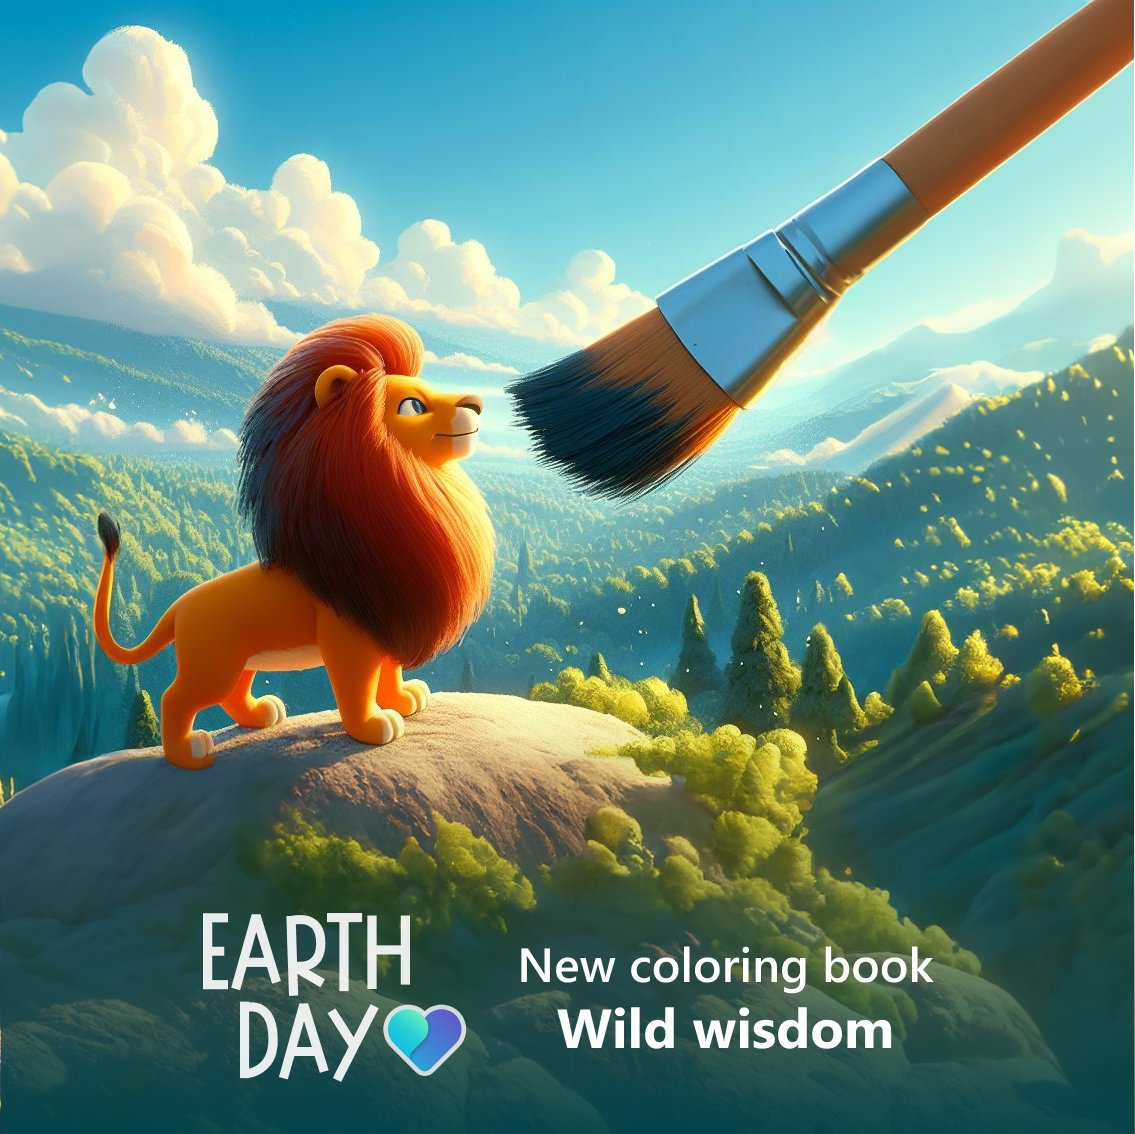 New #ColoringBook in #ReflectApp for #EarthDay 🌍 Explore essential life skills inspired by nature's finest! 🐾 Find resilience in tortoises 🐢, teamwork in penguins 🐧, and much more 🐘🦓 Let's learn from the wild and color our world with wisdom! 🎨 👉 reflect.do/wildwisdomcolo…